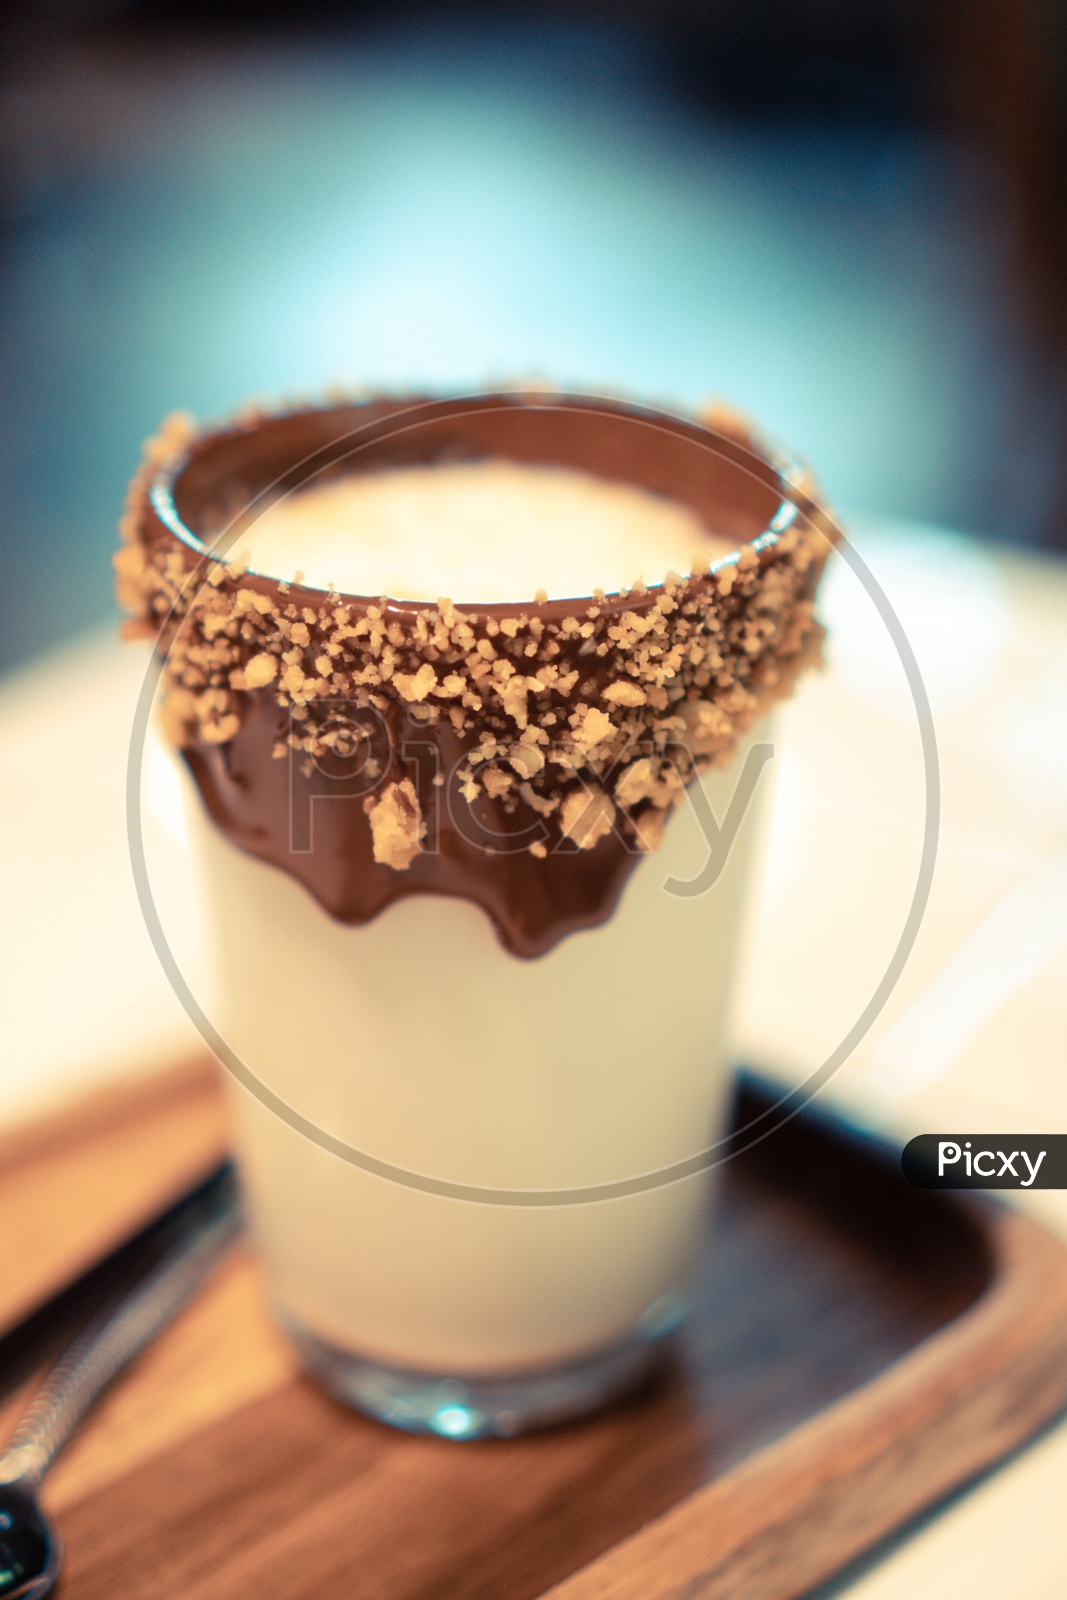 Fresh milk with chocolate dip and sugar topping, coffee cafe